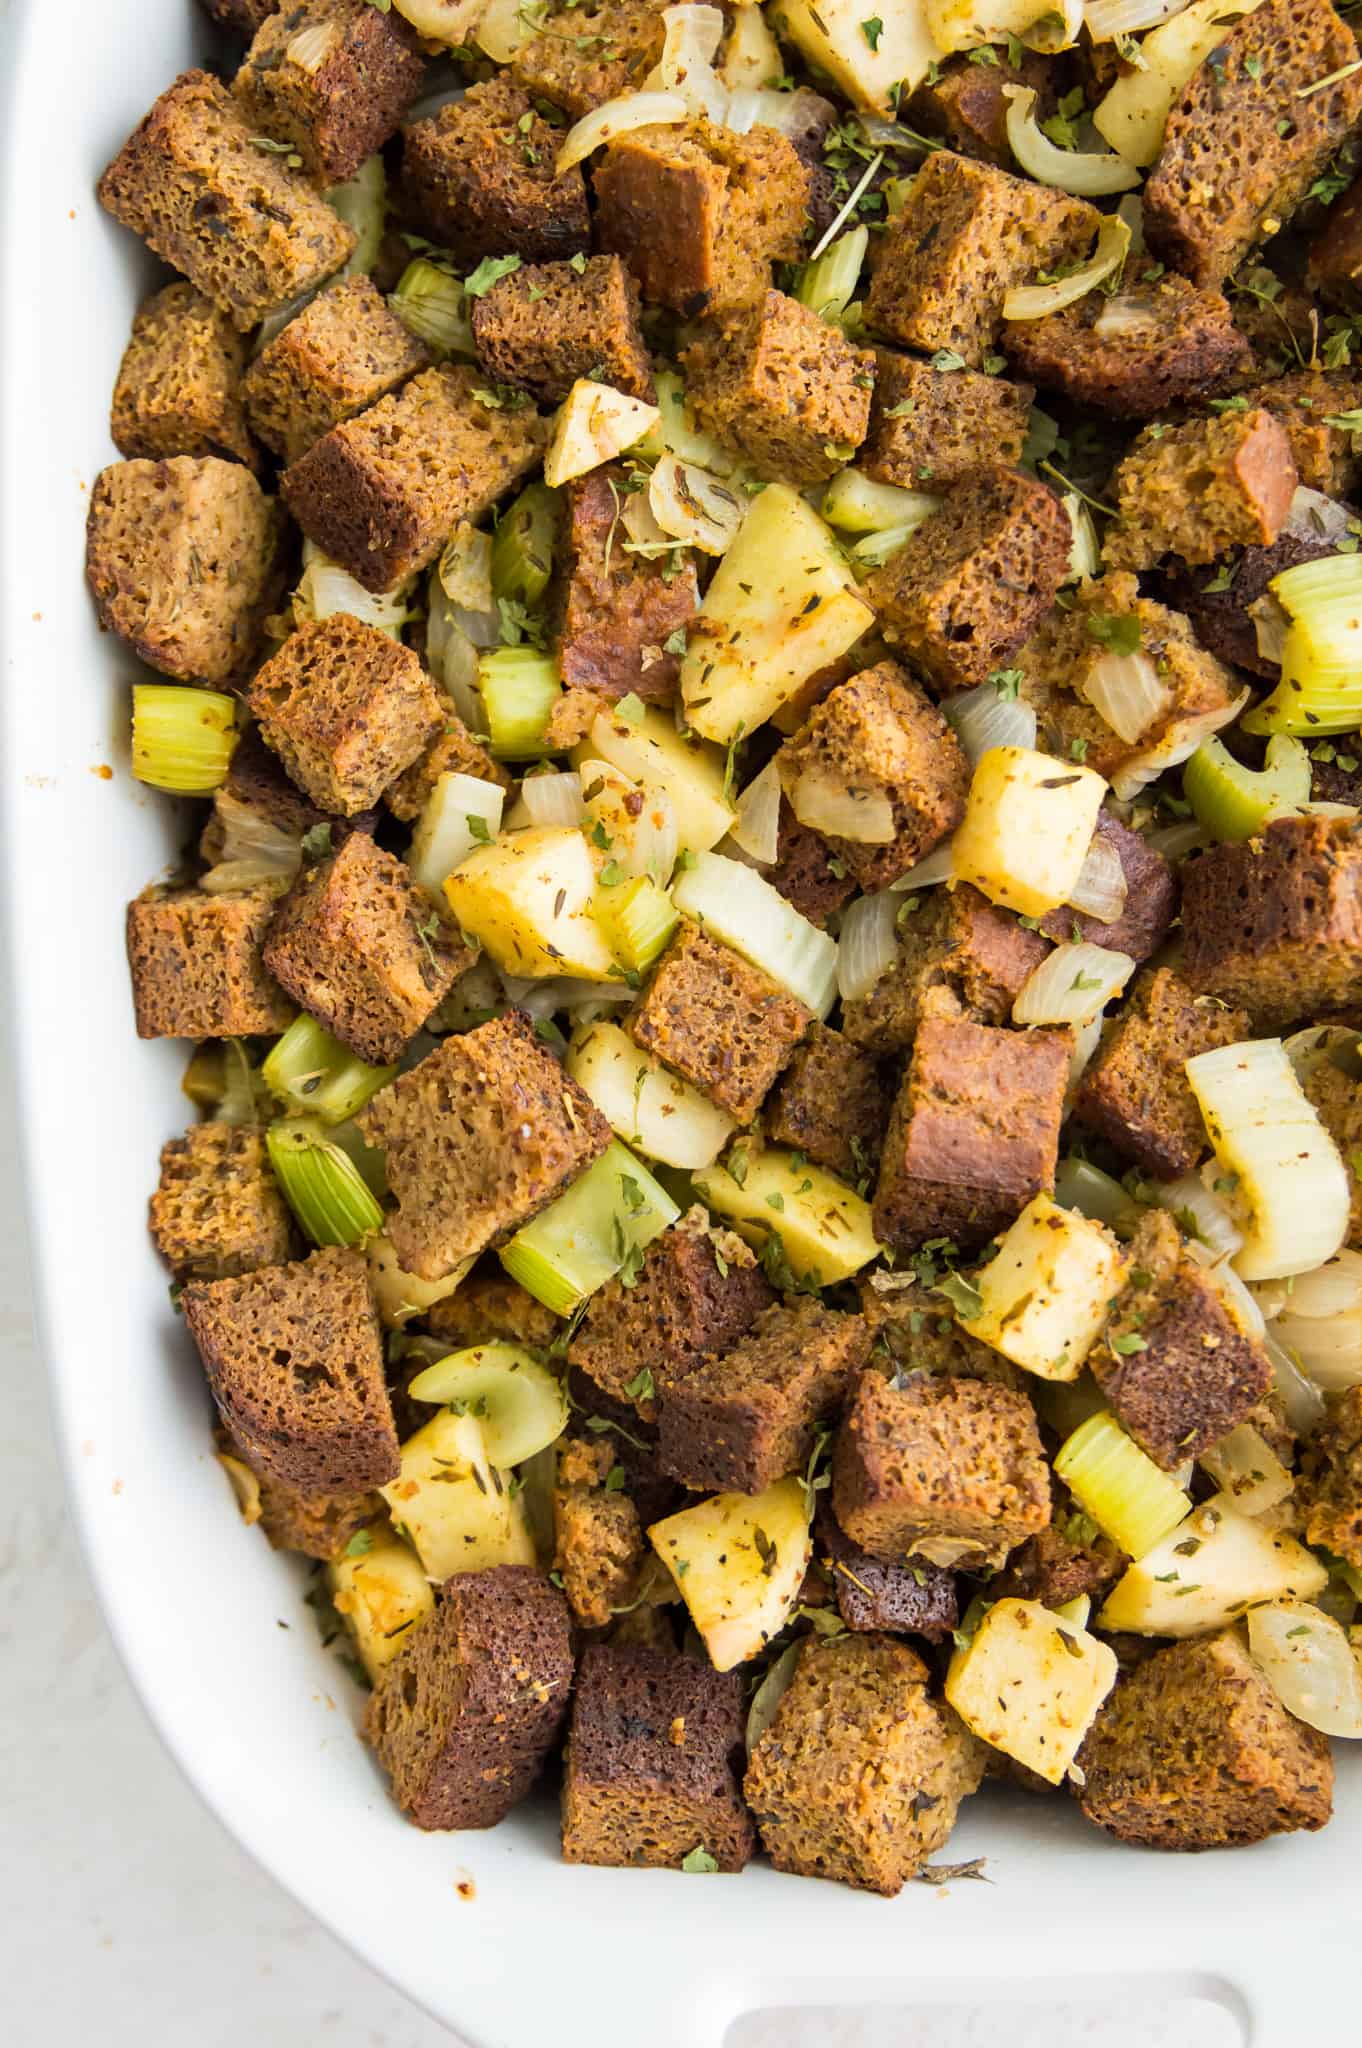 A platter with paleo stuffing.